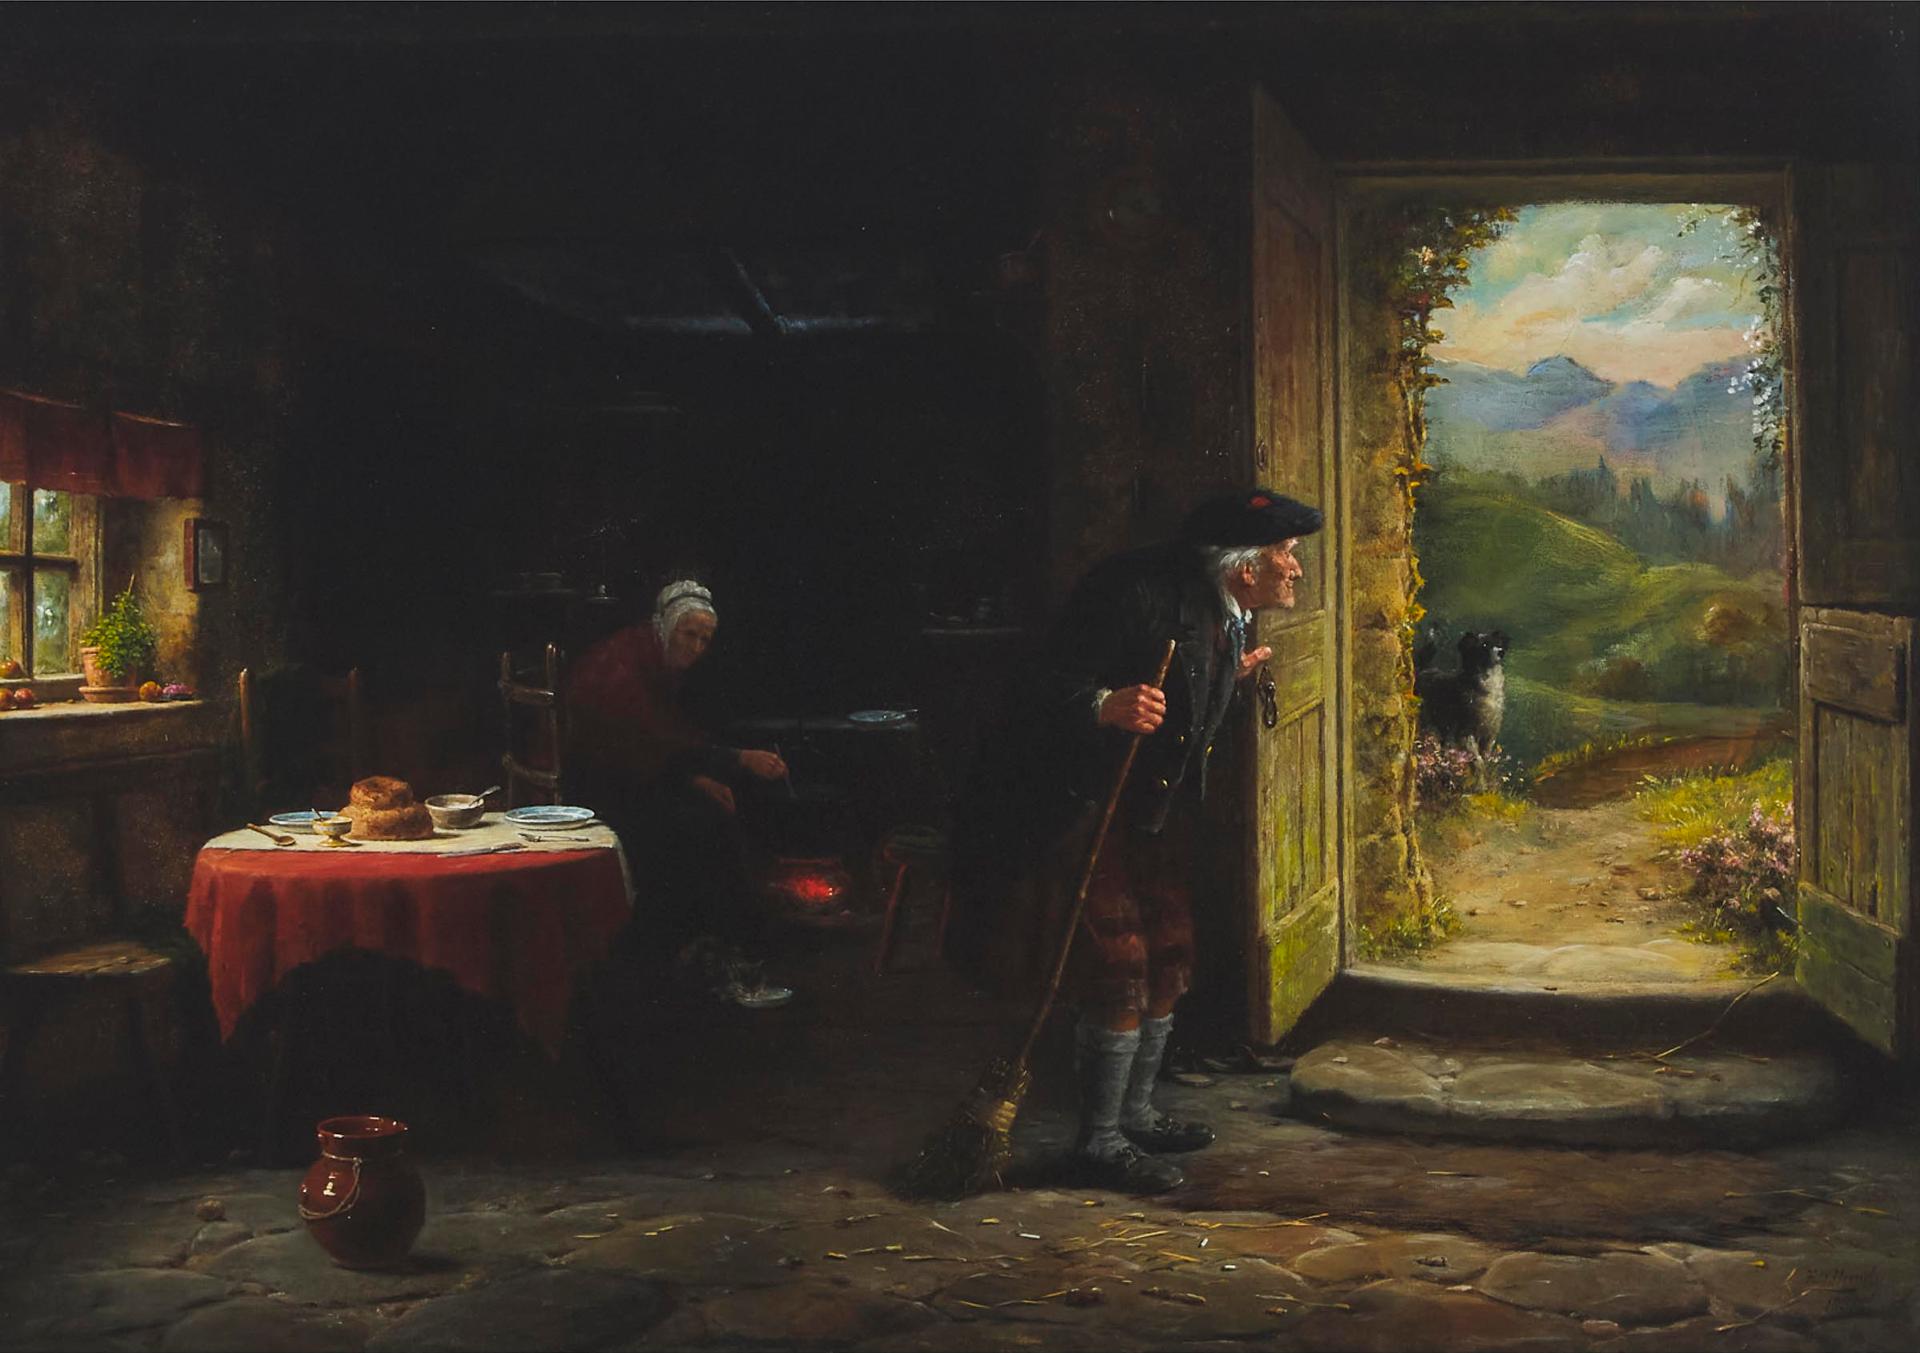 Frederick Daniel Hardy (1826-1911) - The Unexpected Visitor